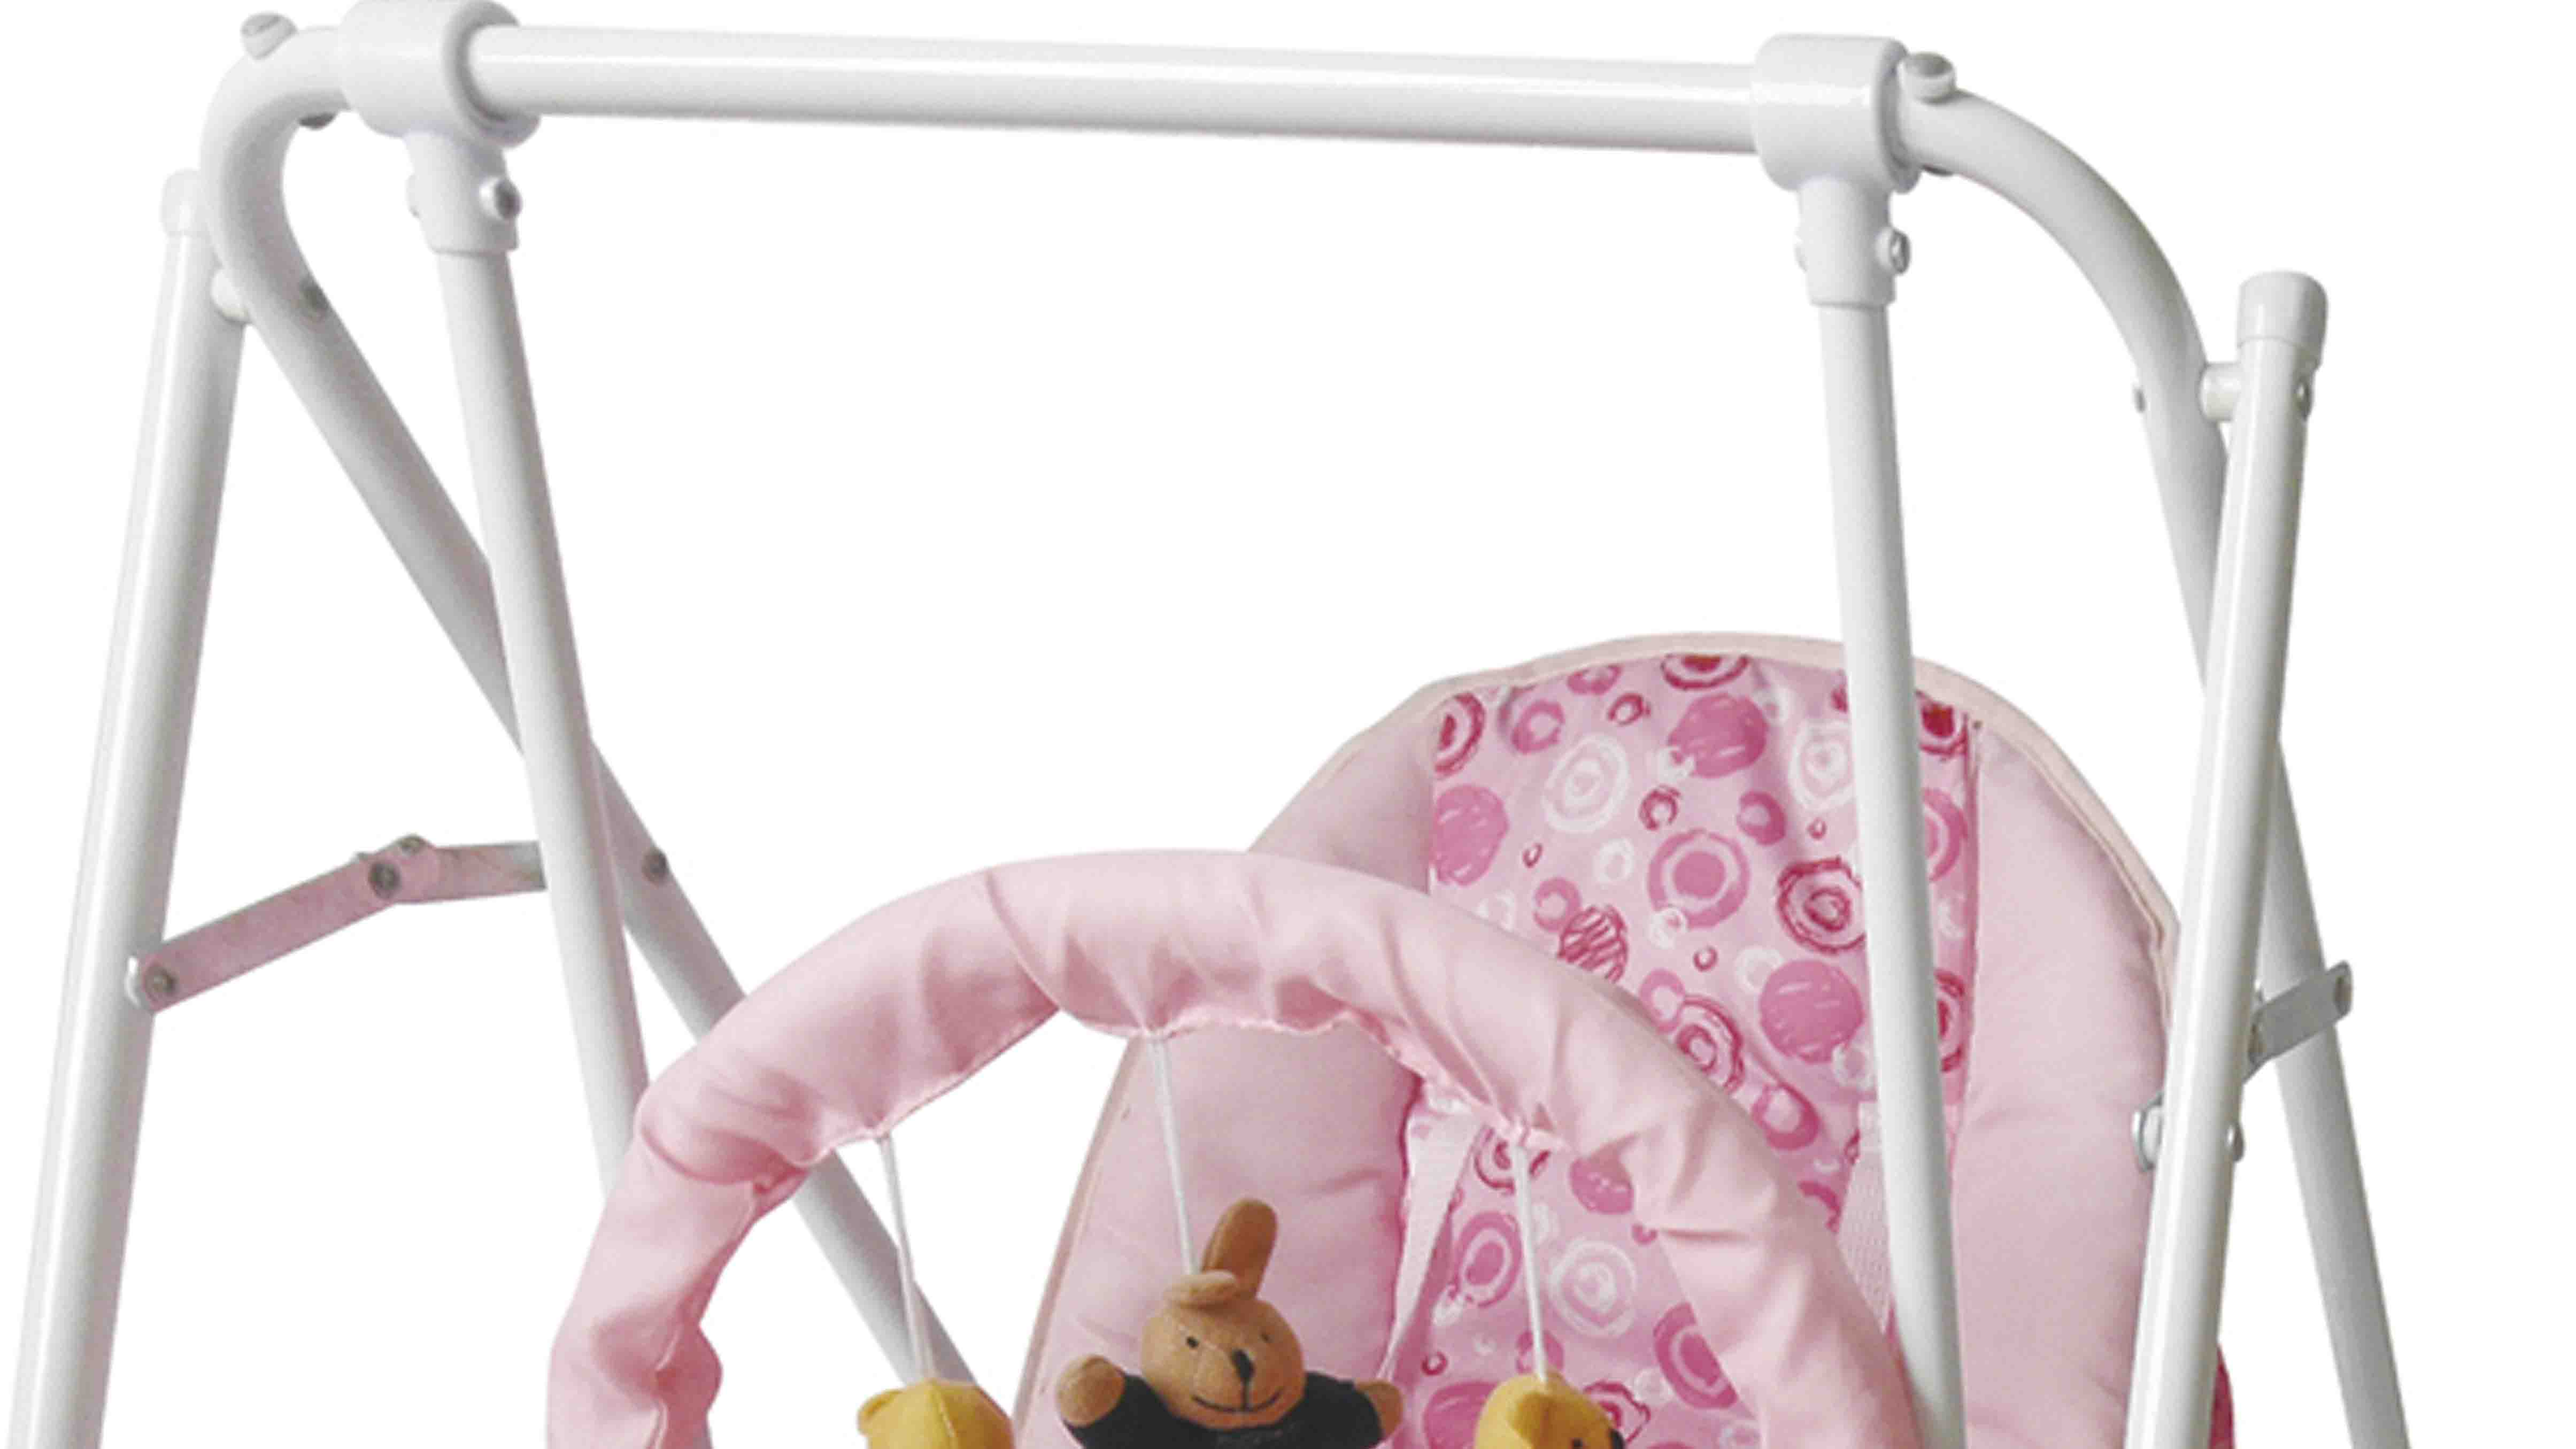 Aoqi buy baby swing with good price for kids